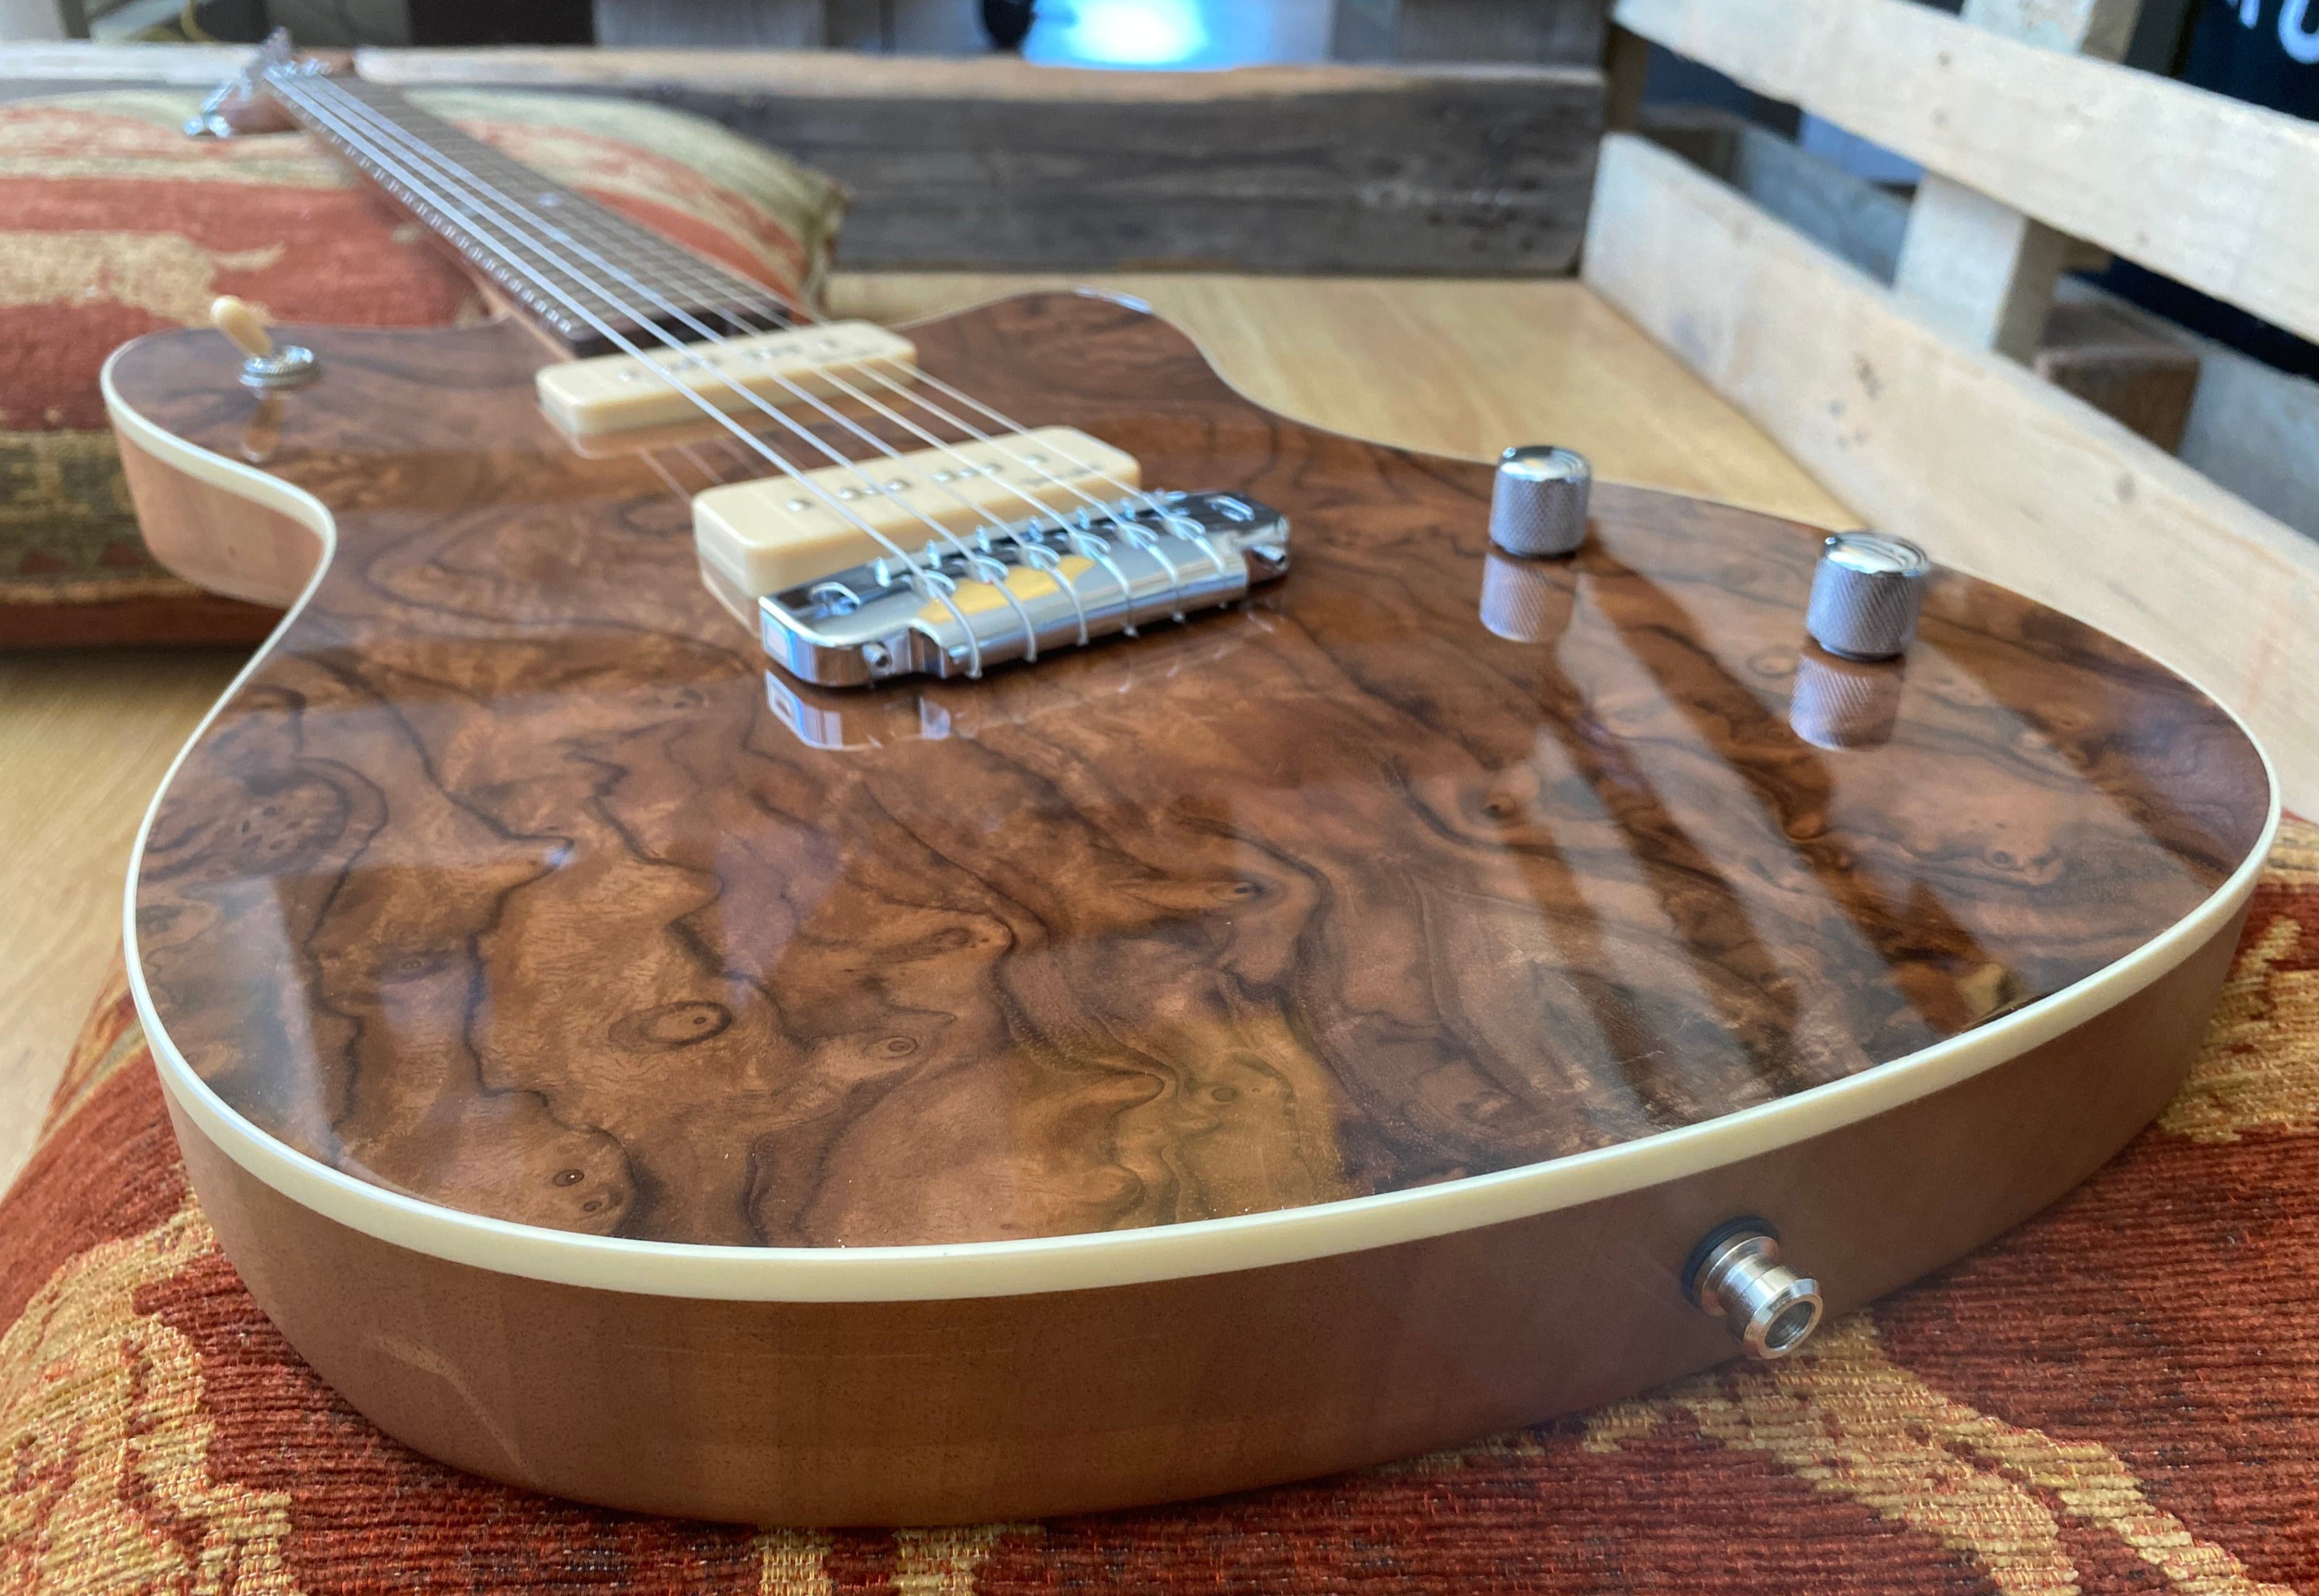 Gordon Smith Gatsby Deluxe Burled Walnut Custom, Electric Guitar for sale at Richards Guitars.